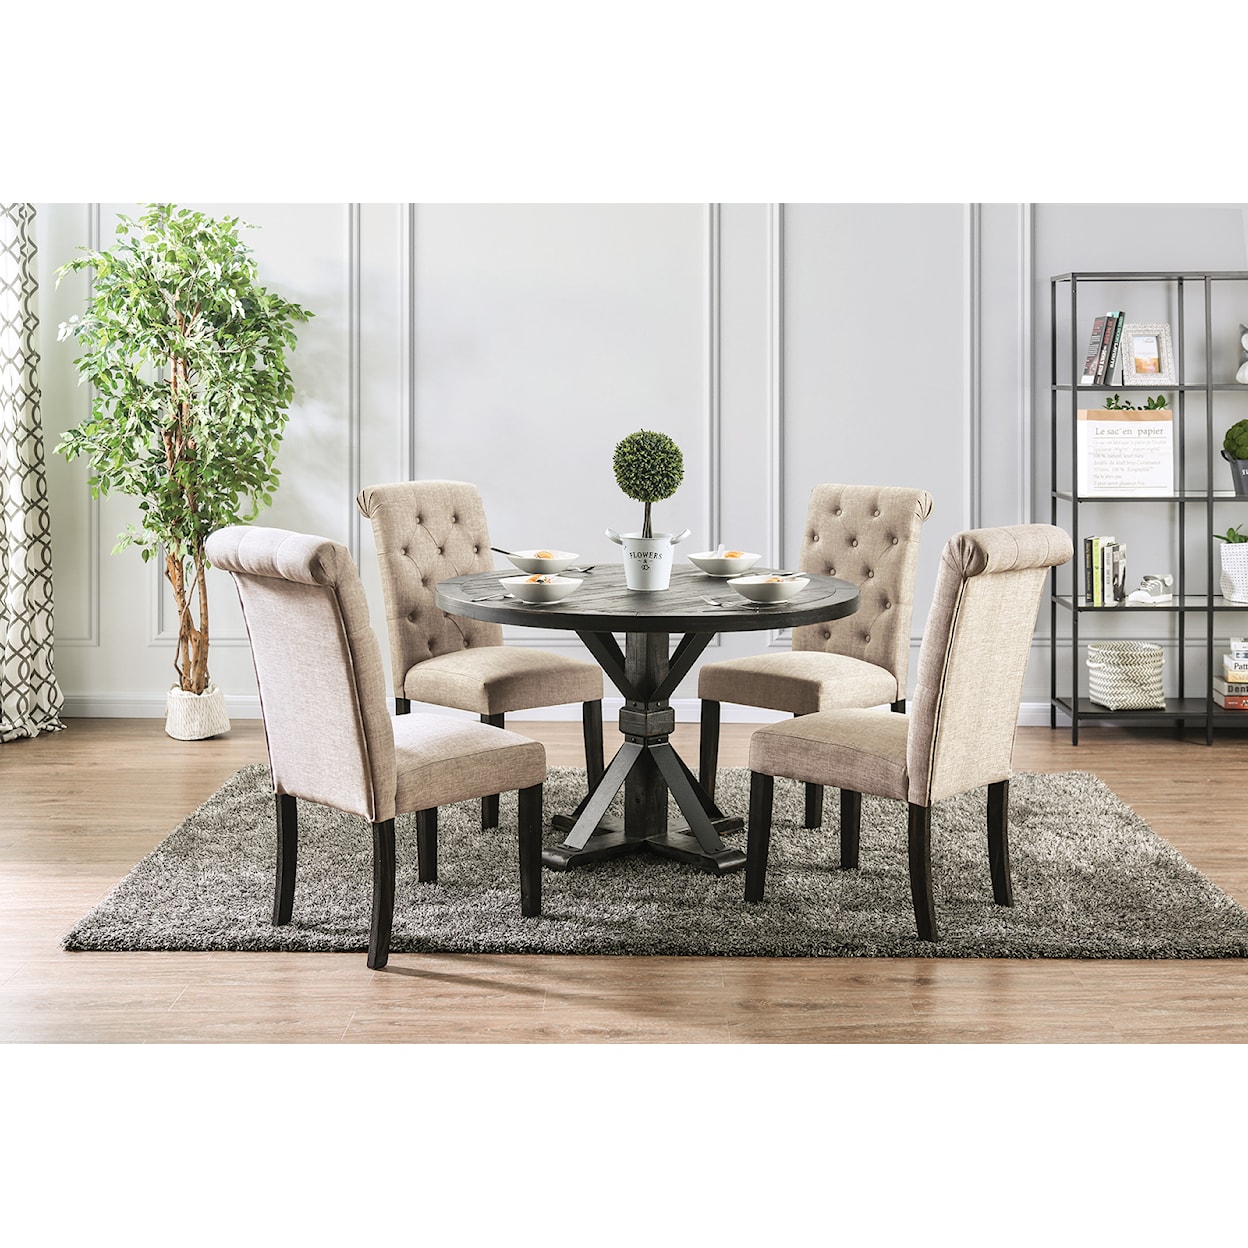 FUSA Alfred 5 Pc. Round Dining Table Set